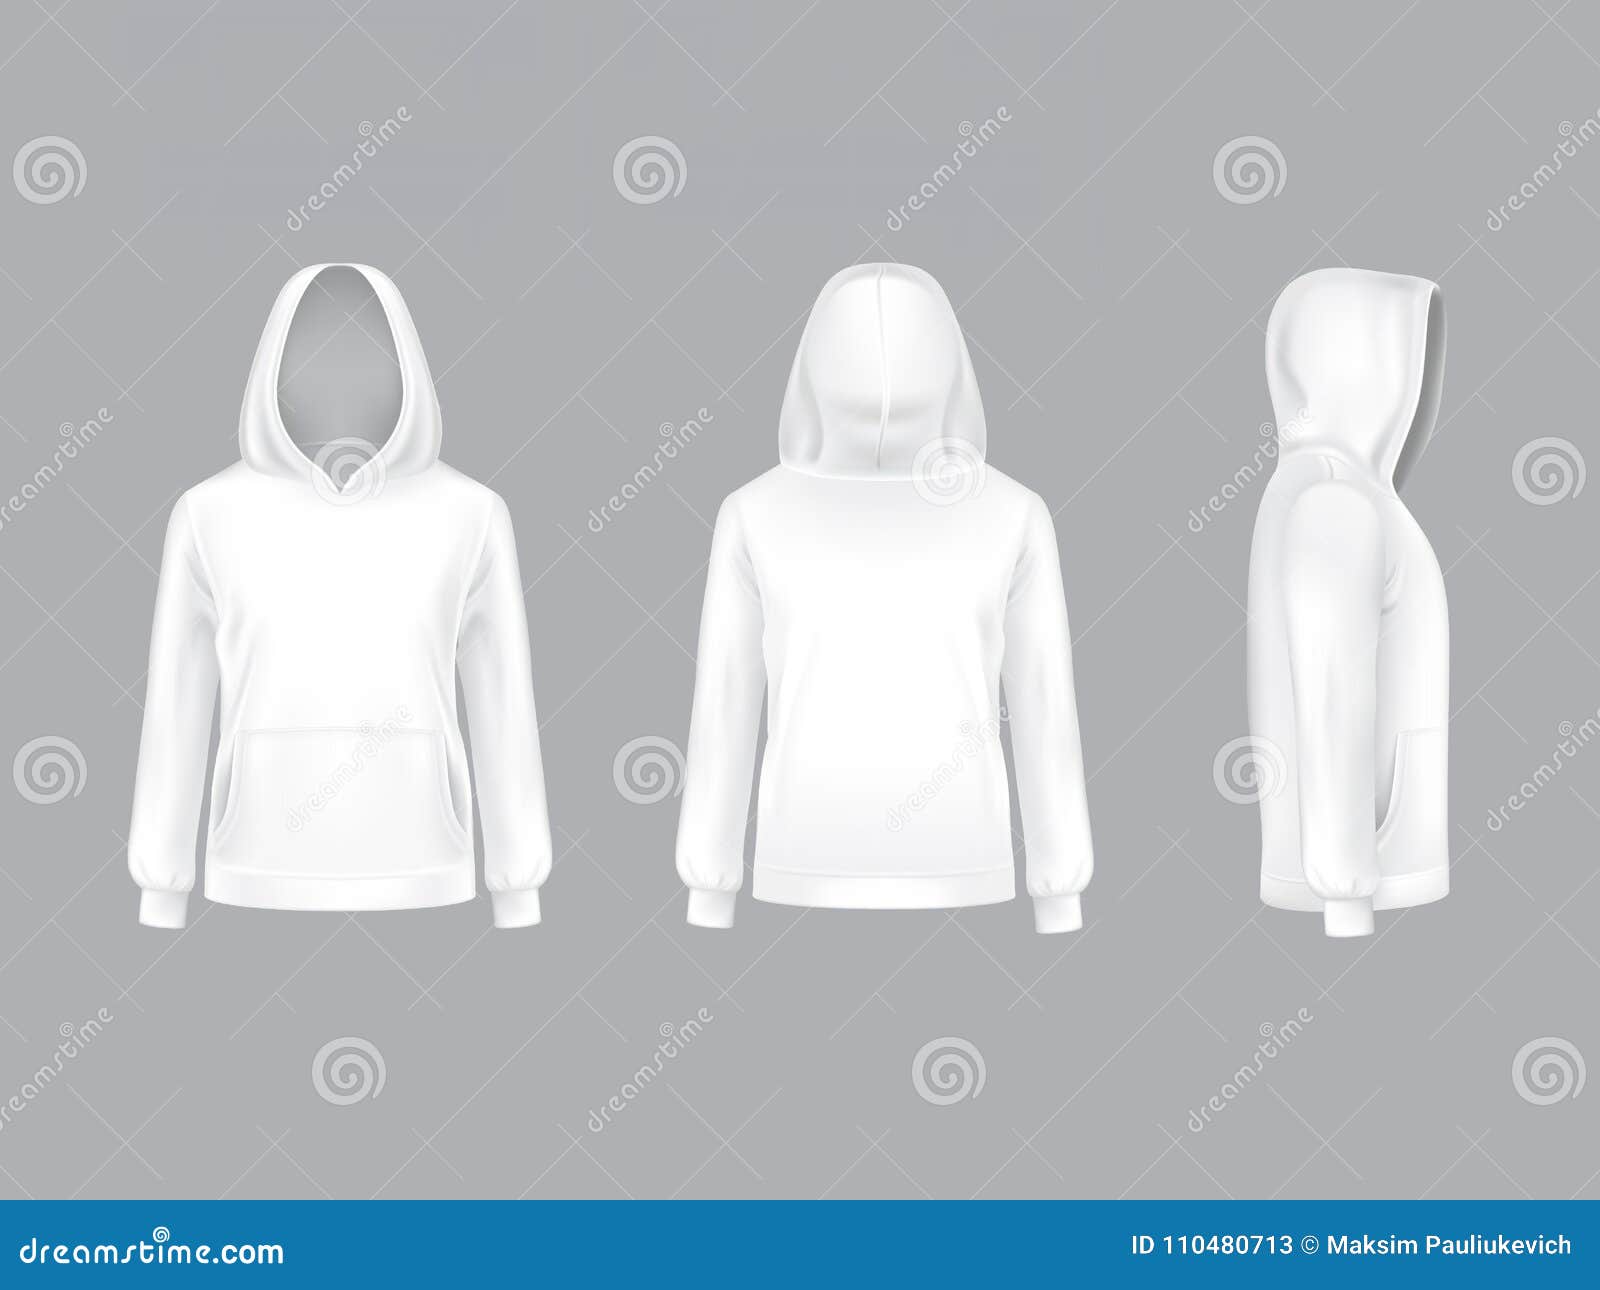 Download Vector Mockup With Realistic White Hoodie Stock Vector ...